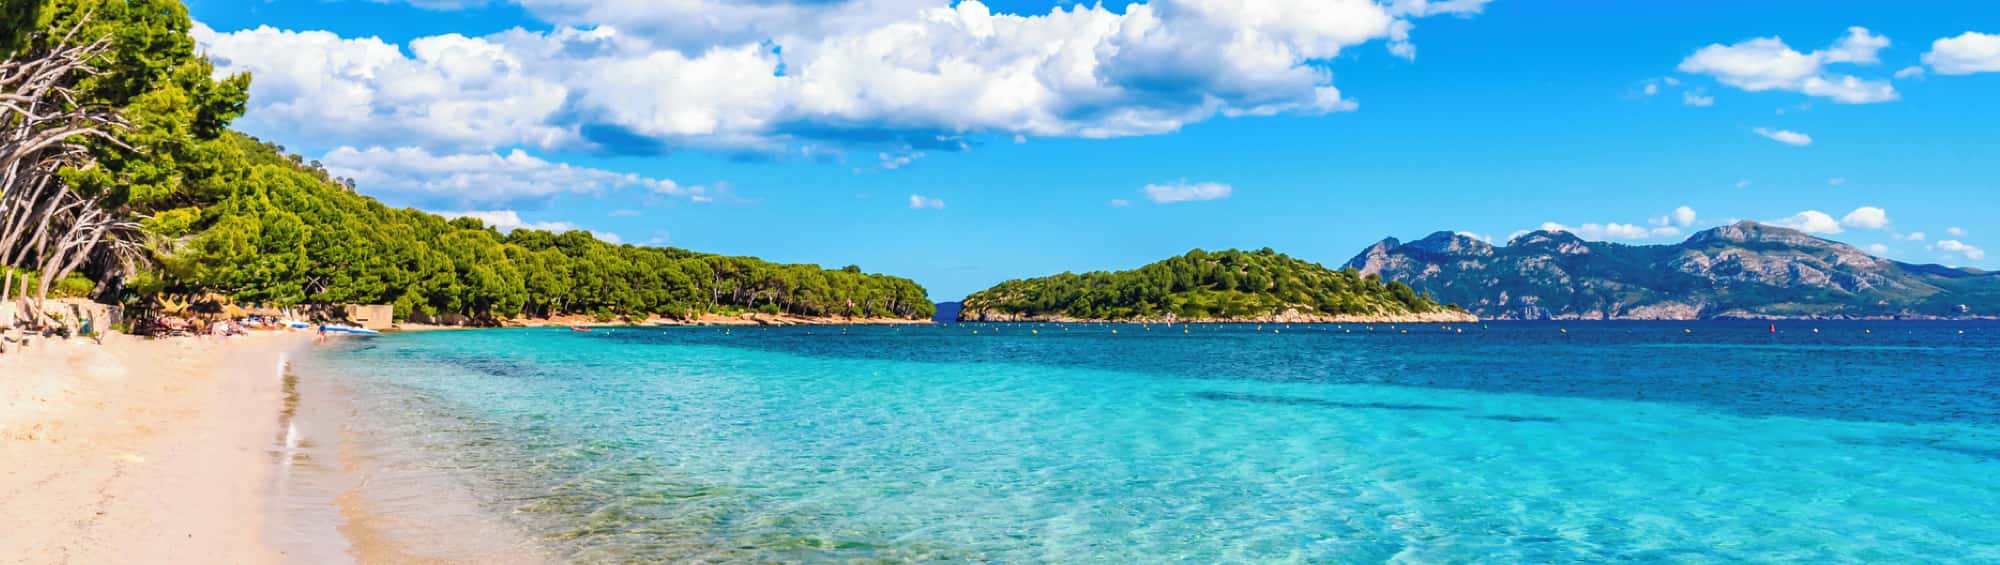 The 10 Best Mediterranean Beaches to Visit on Your Next Holiday